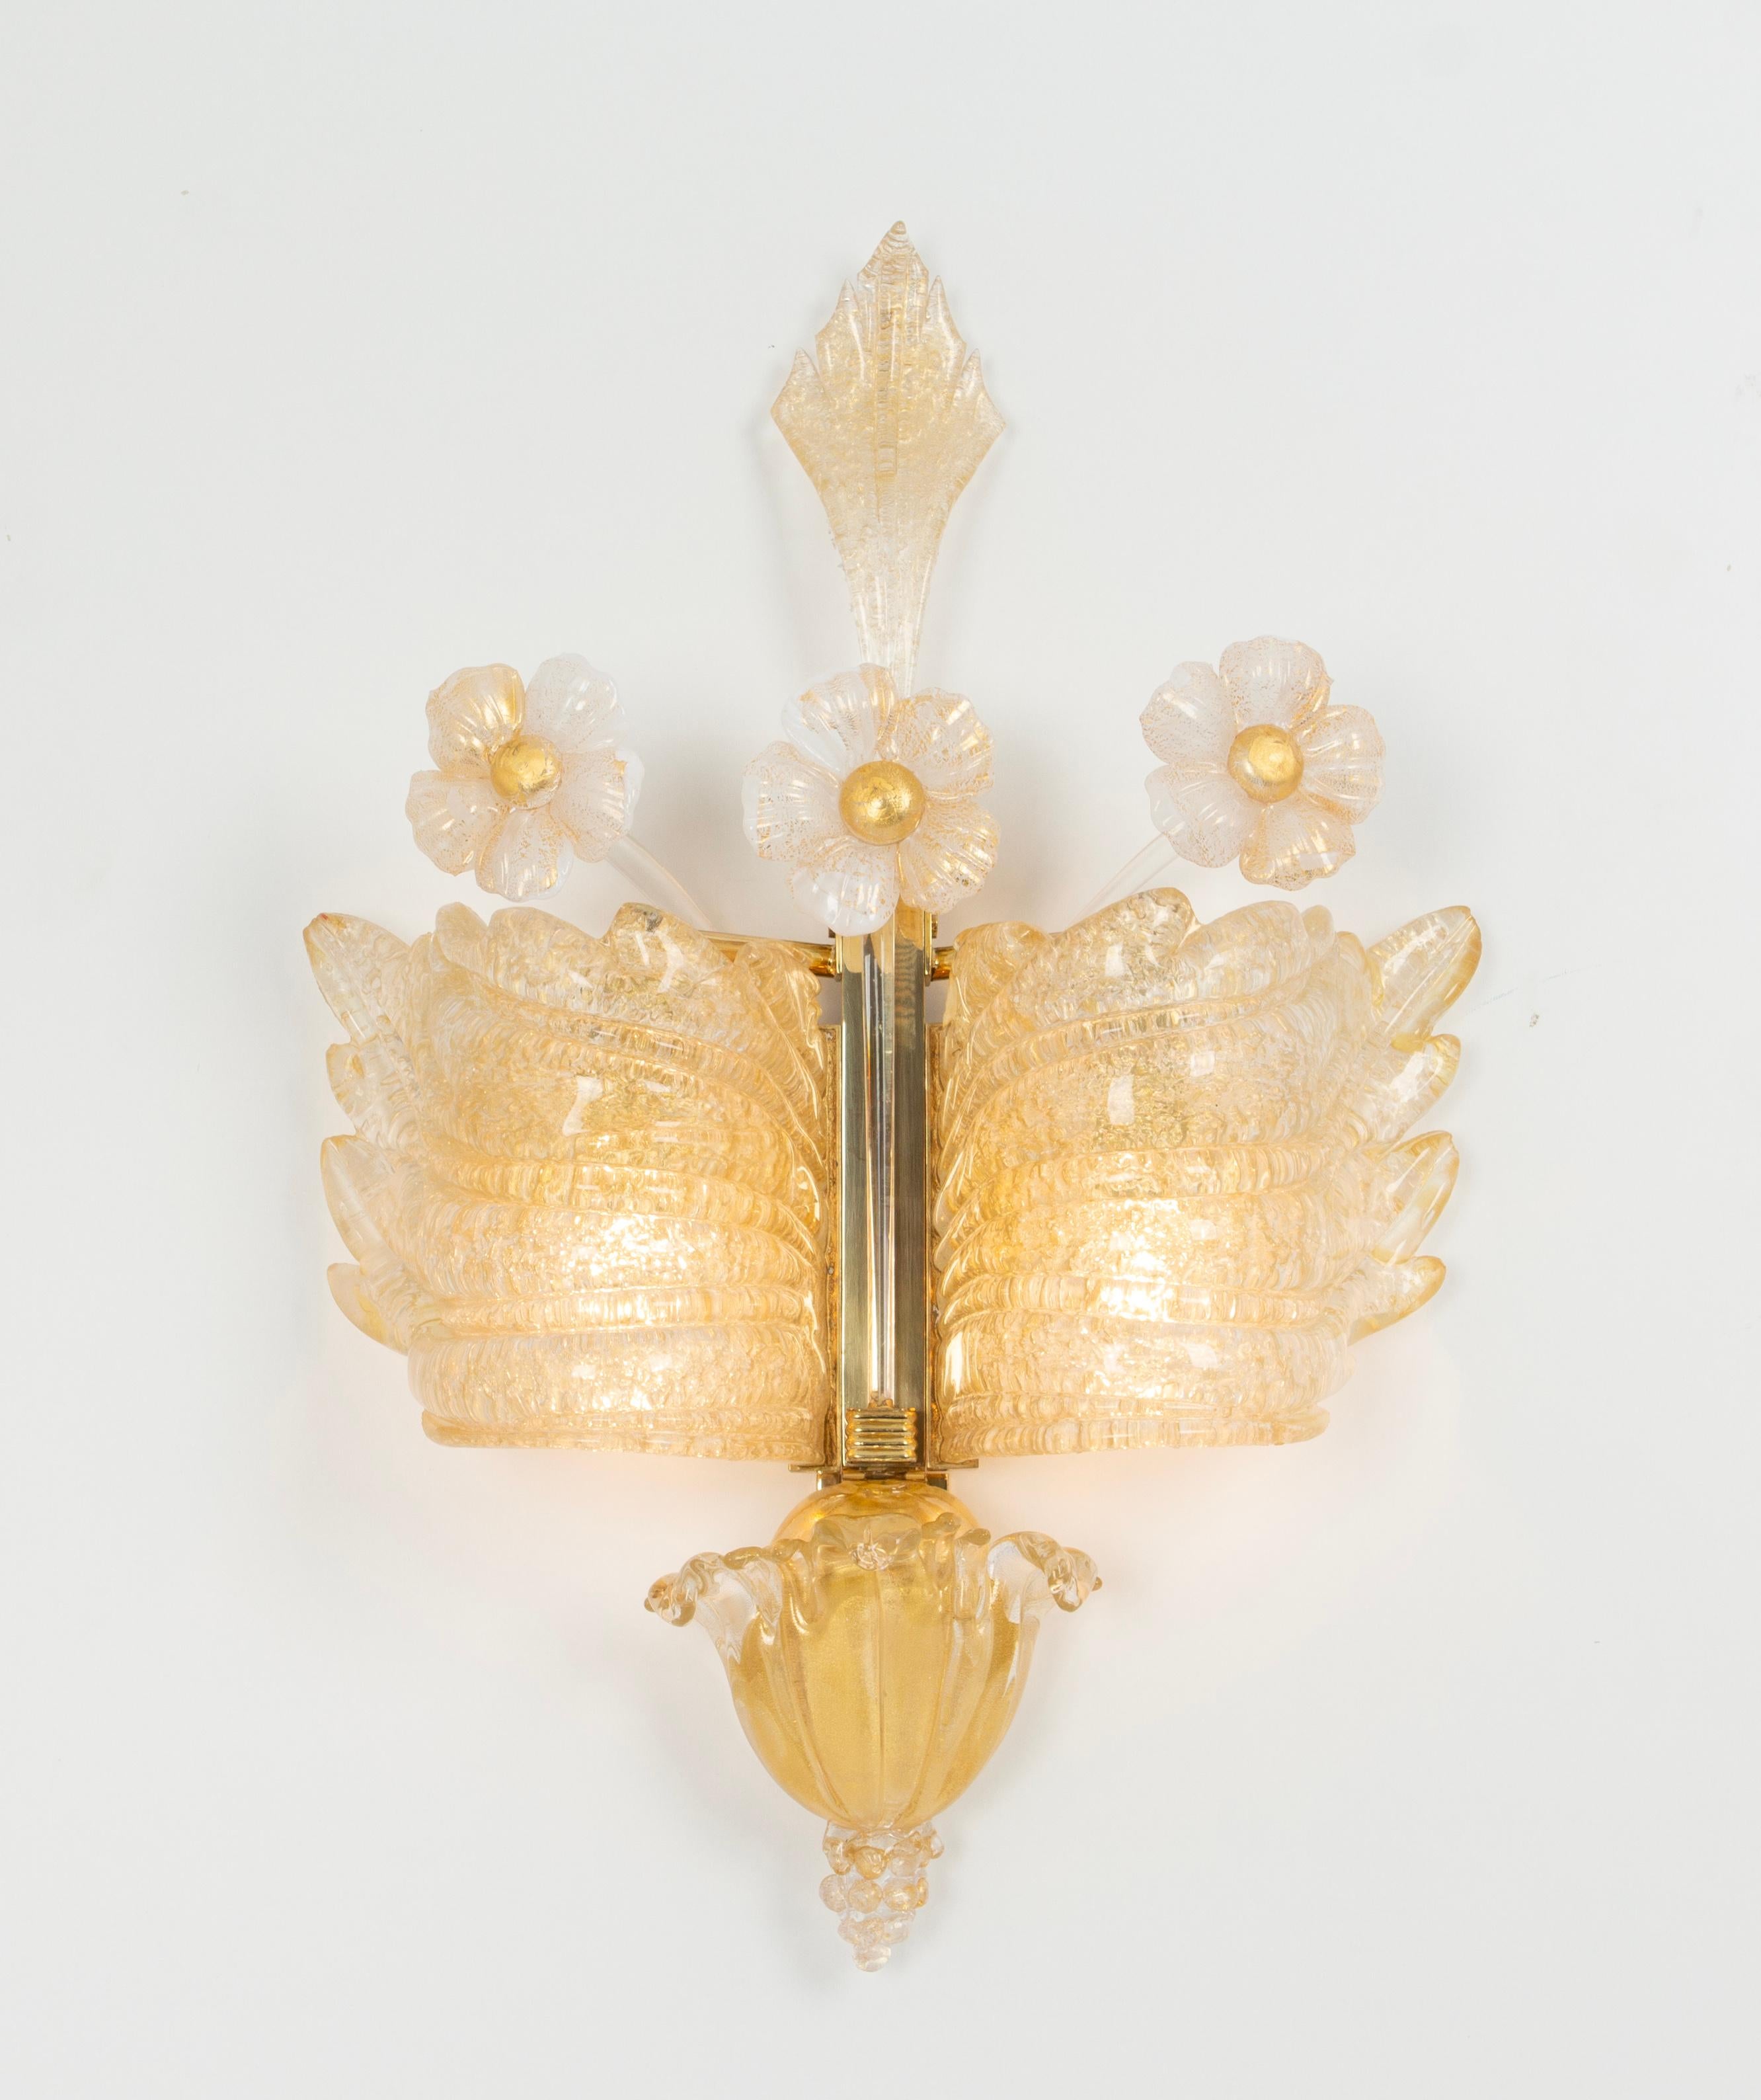 Pair of Large Murano Glass Wall Sconces by Barovier & Toso, Italy, 1970s For Sale 6